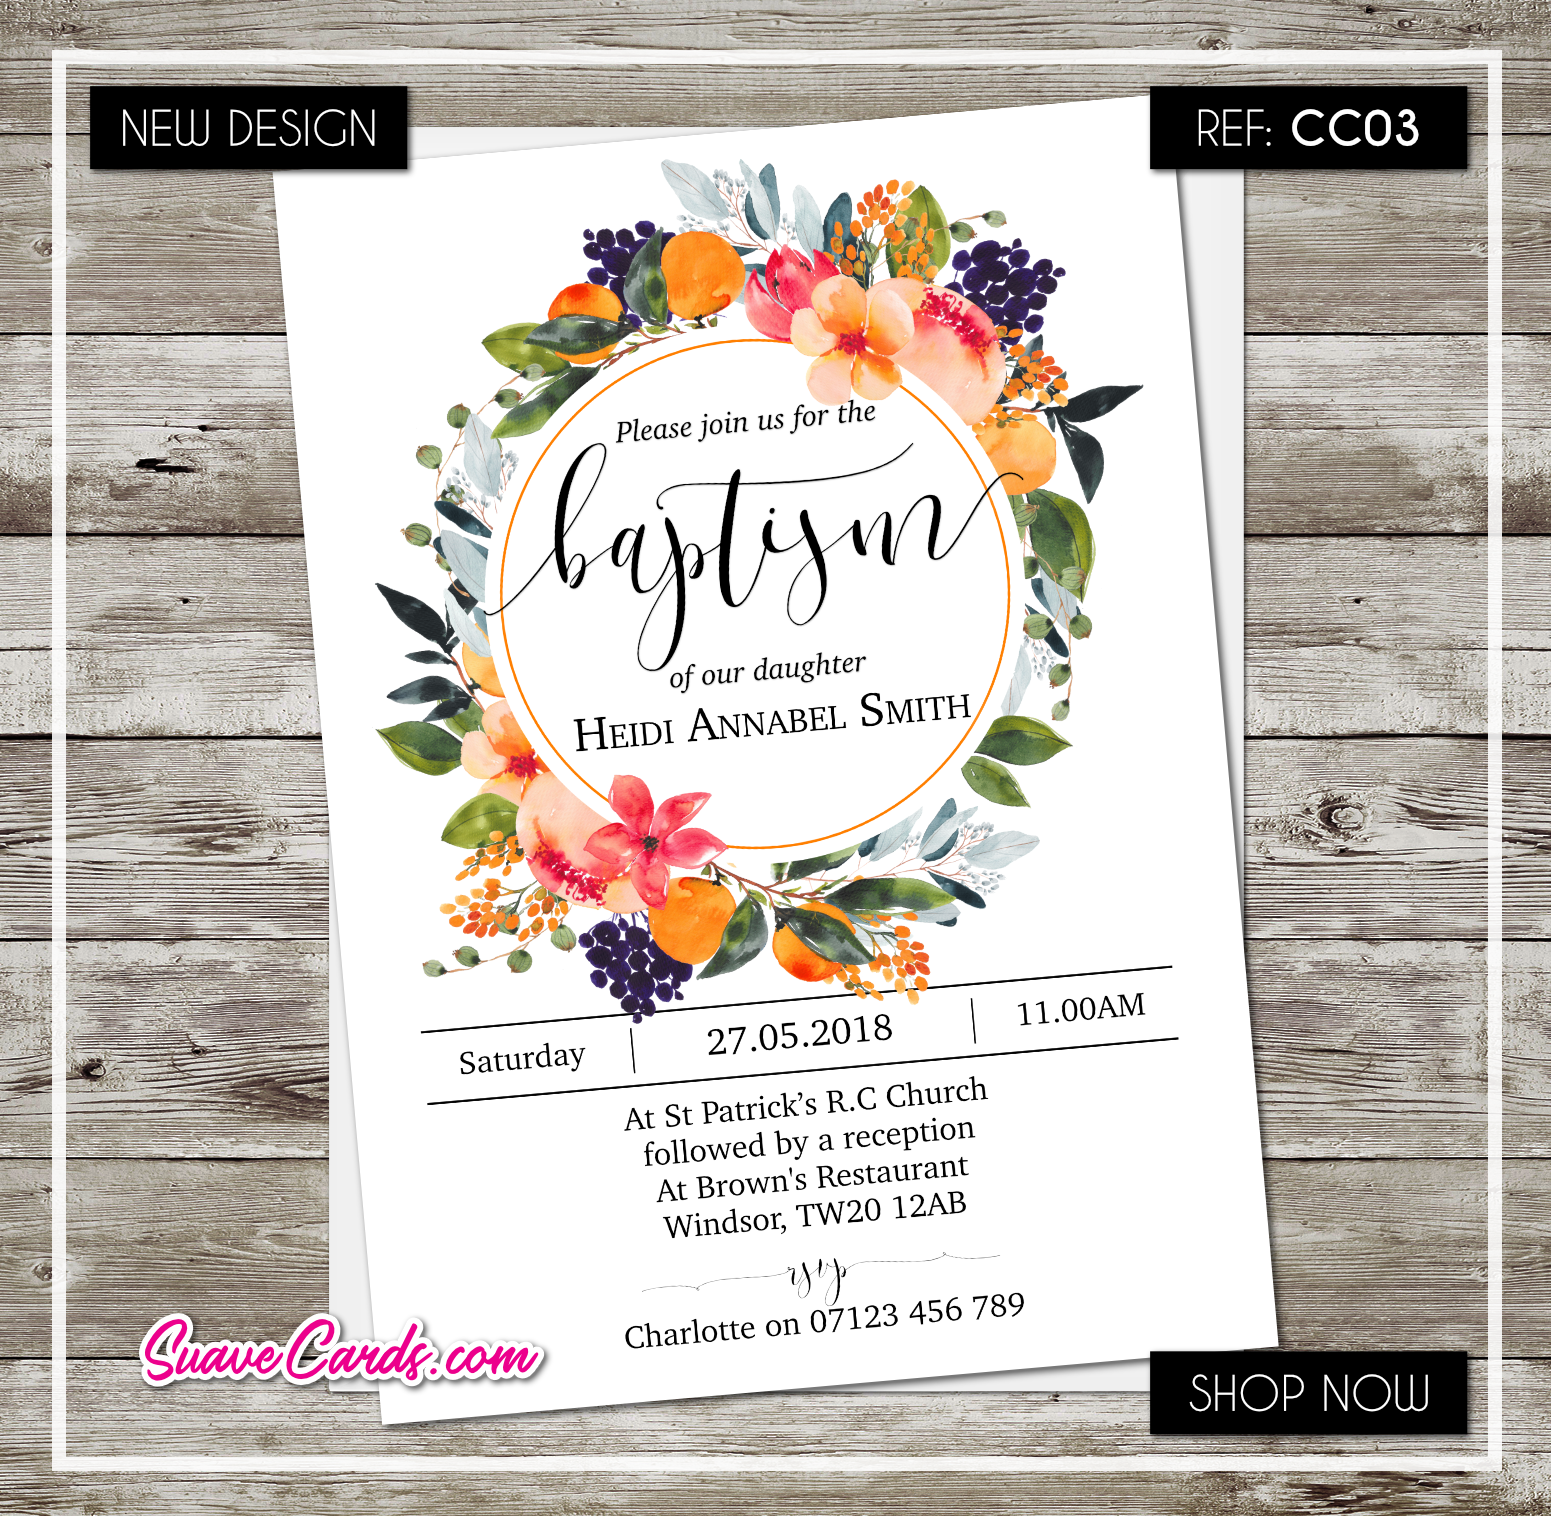 Baptism/Christening/Any Occasion – Floral Wreath Design